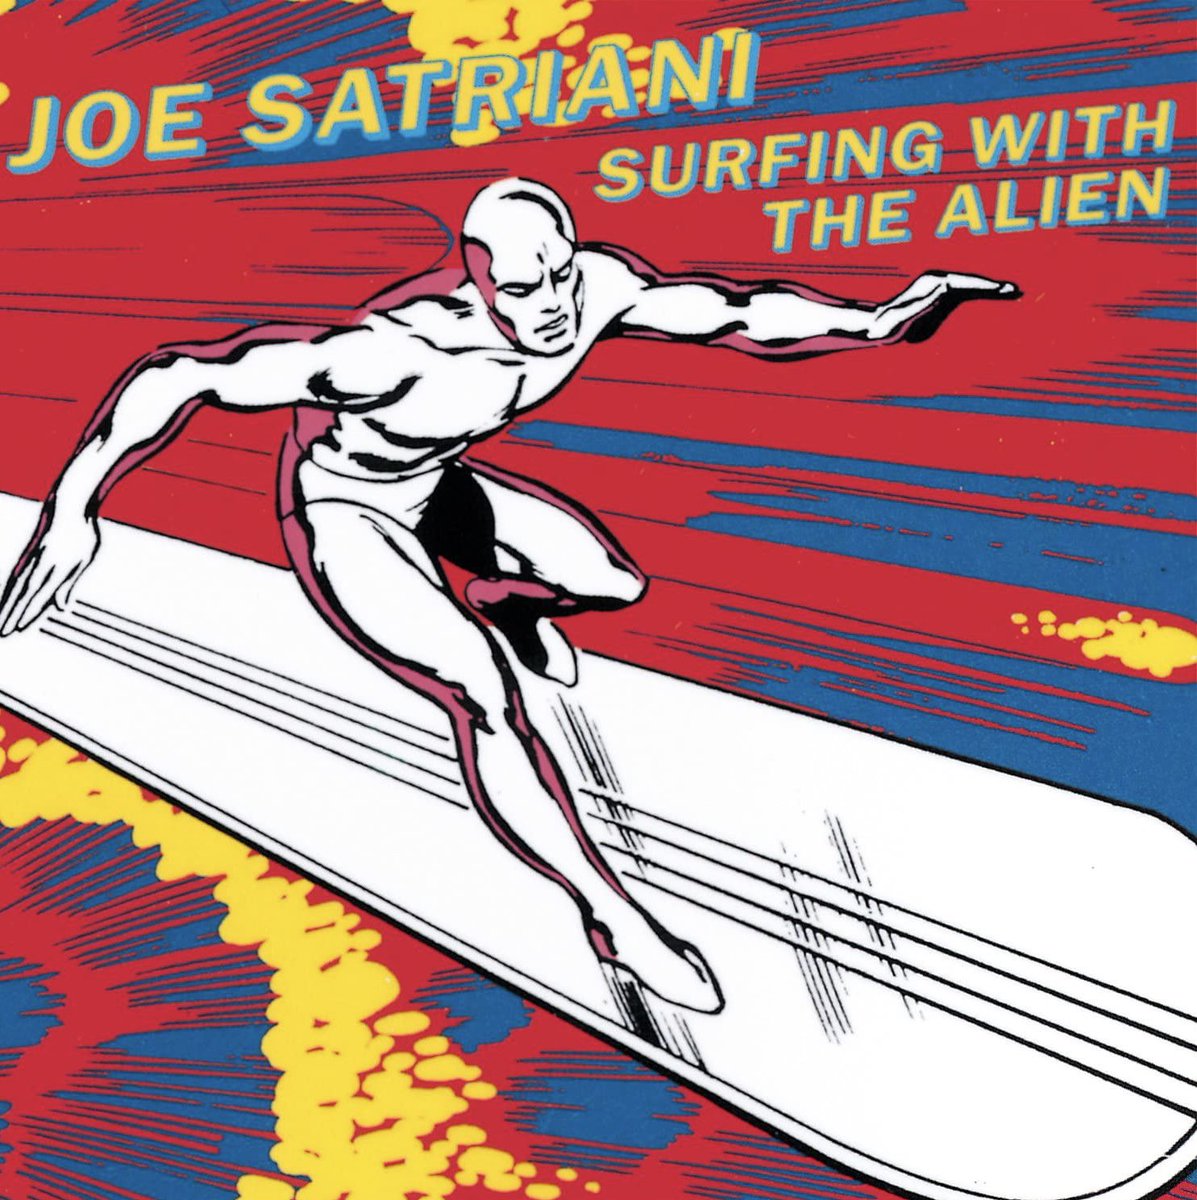 Oct 15th 1987 #JoeSatriani released the album “Surfing With The Alien” #SatchBoogie #AlwaysWithMeAlwaysWithYou #Circles #InstrumentalRock

Did you know..
The album reached number 29 on the #Billboard chart.
It remained on there for 75 weeks, the longest run of any of his releases